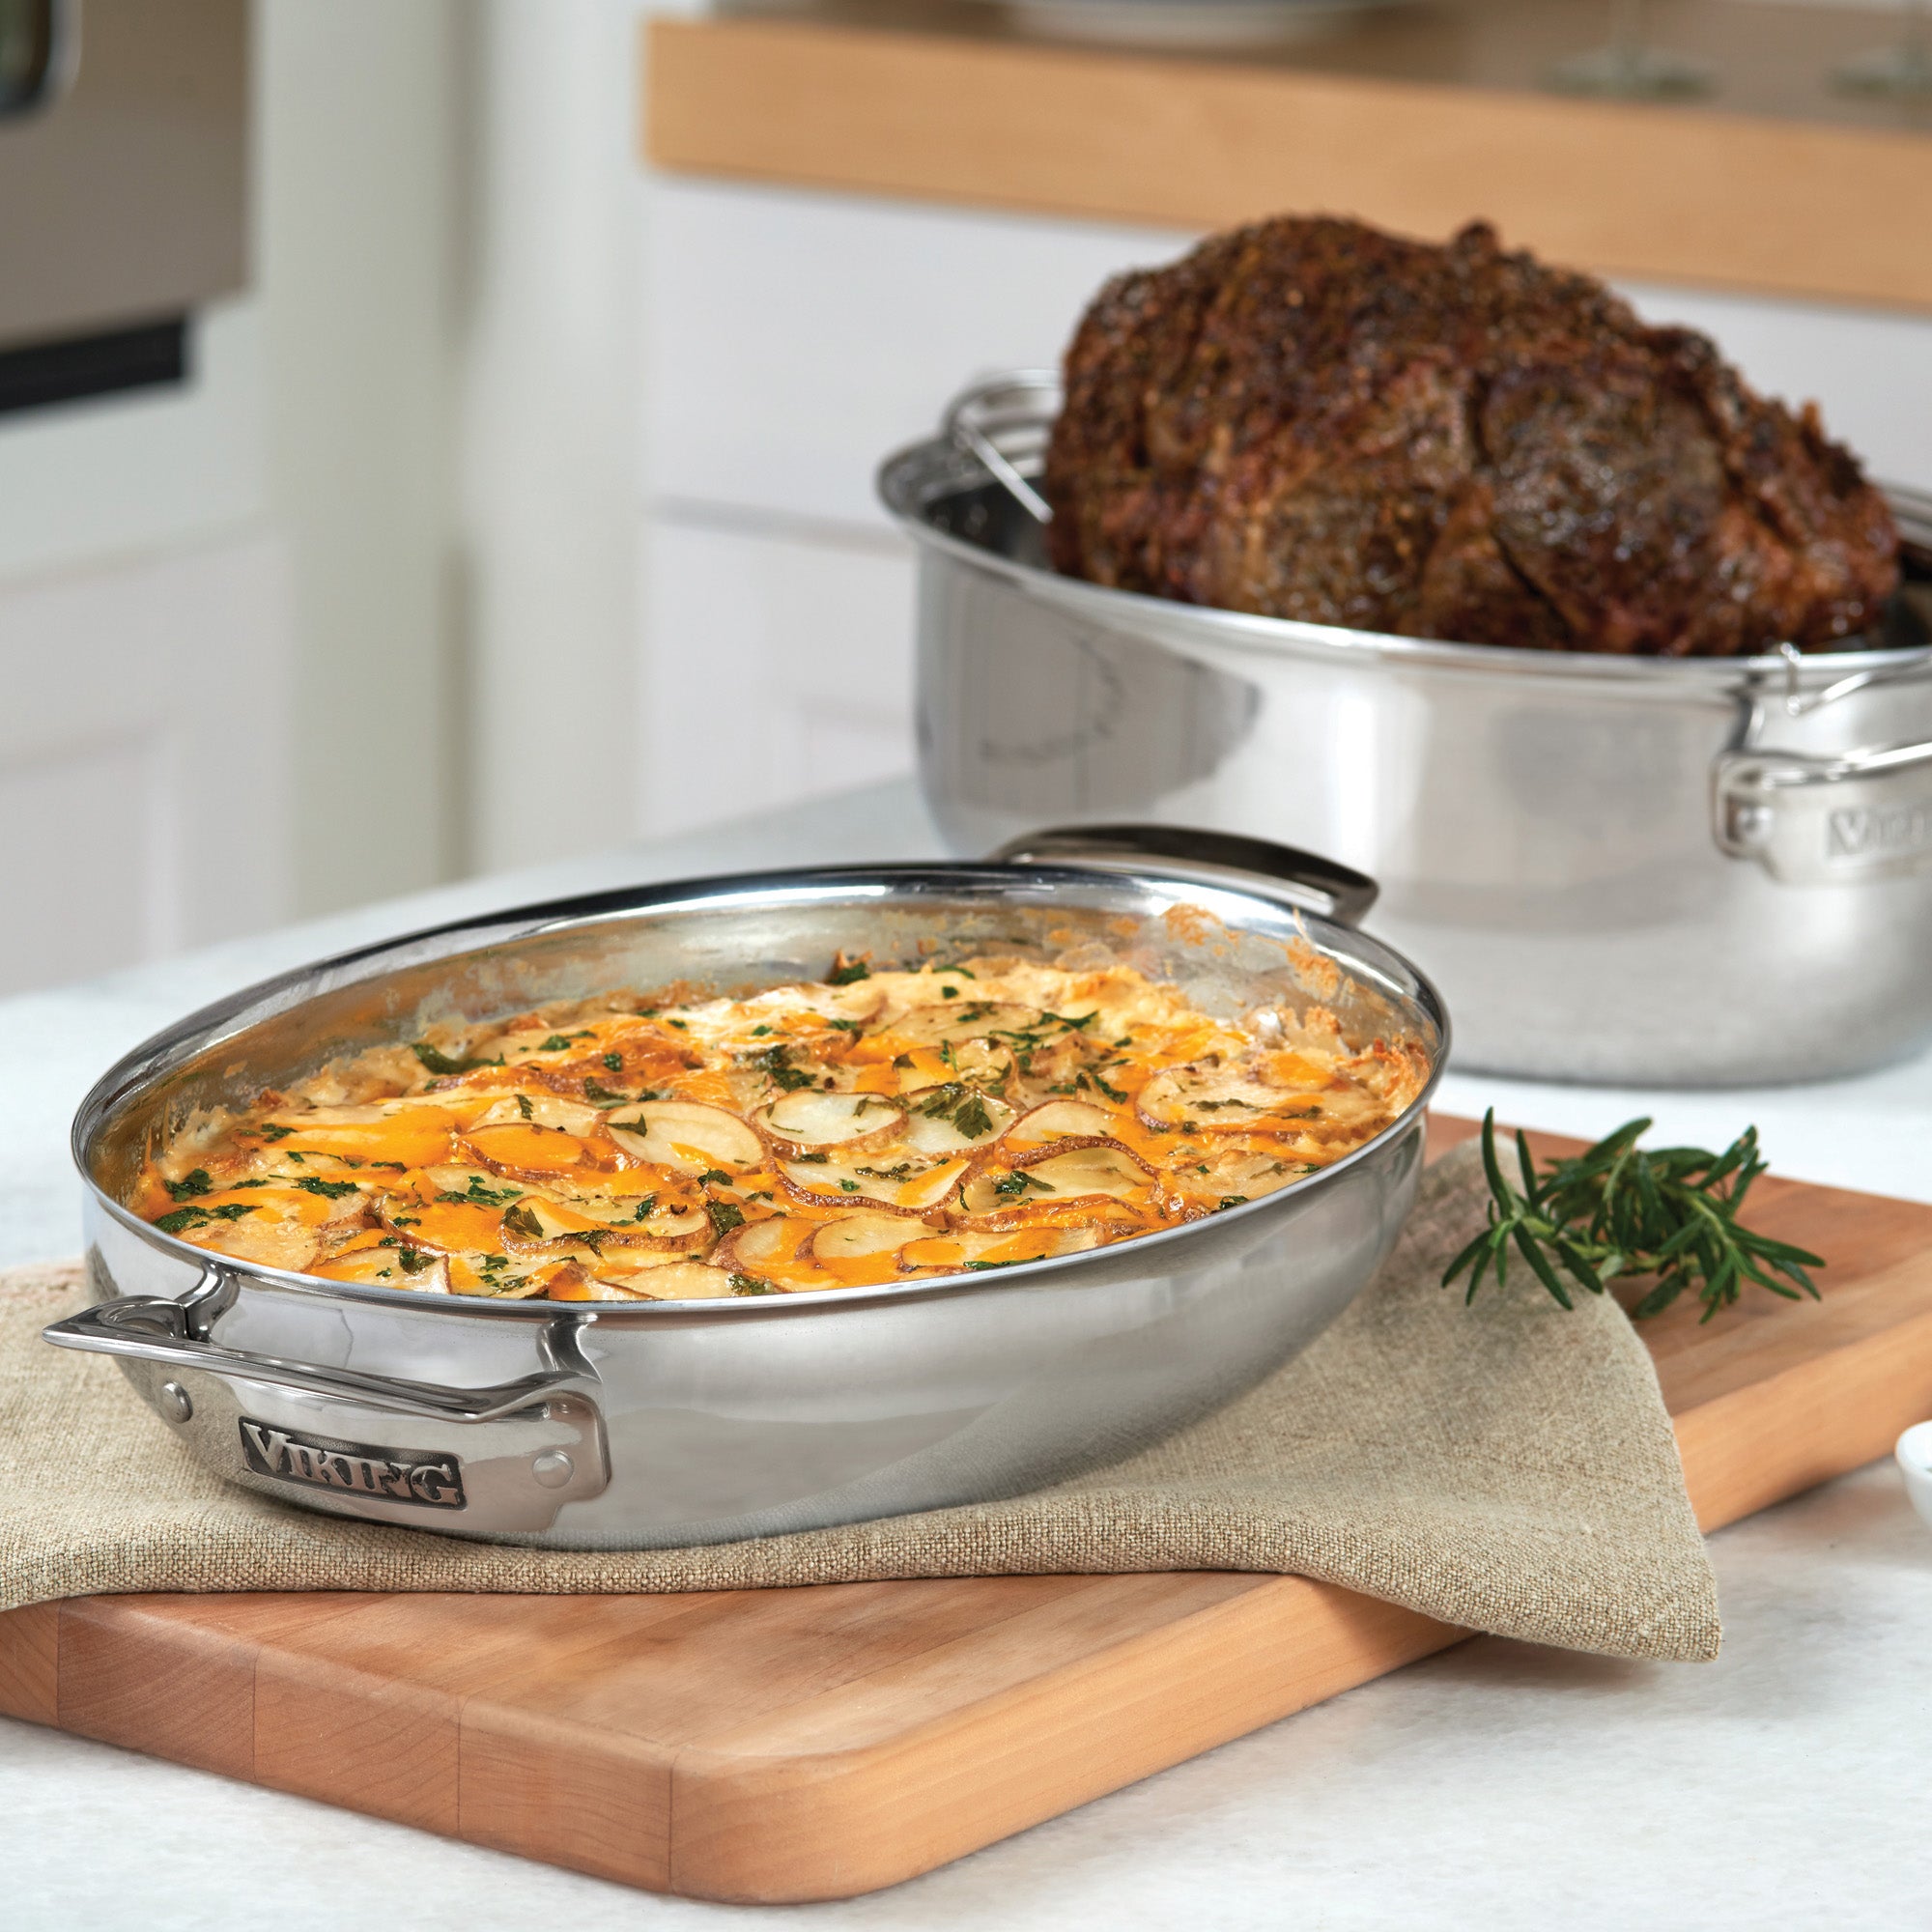 Viking 3-in-1 8.6 Quart Die Cast Oval Roaster with Glass Basting Lid